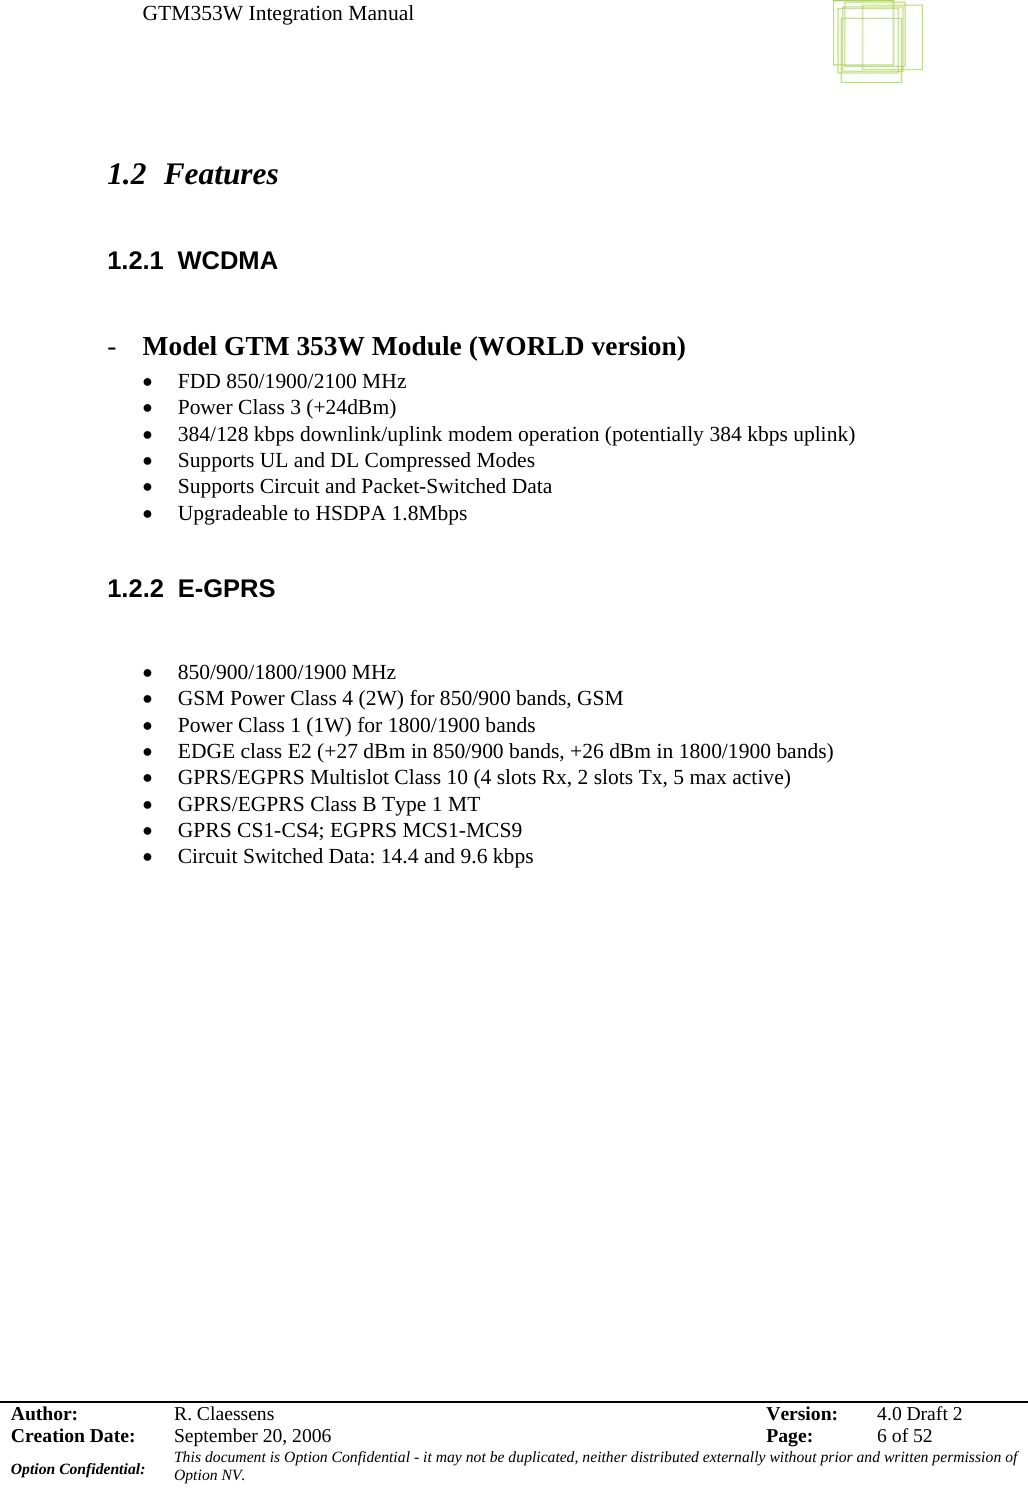 GTM353W Integration Manual      Author: R. Claessens  Version:  4.0 Draft 2Creation Date:  September 20, 2006  Page:  6 of 52 Option Confidential:  This document is Option Confidential - it may not be duplicated, neither distributed externally without prior and written permission of Option NV.    1.2 Features  1.2.1 WCDMA   - Model GTM 353W Module (WORLD version) • FDD 850/1900/2100 MHz  • Power Class 3 (+24dBm) • 384/128 kbps downlink/uplink modem operation (potentially 384 kbps uplink) • Supports UL and DL Compressed Modes • Supports Circuit and Packet-Switched Data • Upgradeable to HSDPA 1.8Mbps  1.2.2 E-GPRS   • 850/900/1800/1900 MHz • GSM Power Class 4 (2W) for 850/900 bands, GSM • Power Class 1 (1W) for 1800/1900 bands • EDGE class E2 (+27 dBm in 850/900 bands, +26 dBm in 1800/1900 bands) • GPRS/EGPRS Multislot Class 10 (4 slots Rx, 2 slots Tx, 5 max active) • GPRS/EGPRS Class B Type 1 MT • GPRS CS1-CS4; EGPRS MCS1-MCS9 • Circuit Switched Data: 14.4 and 9.6 kbps  